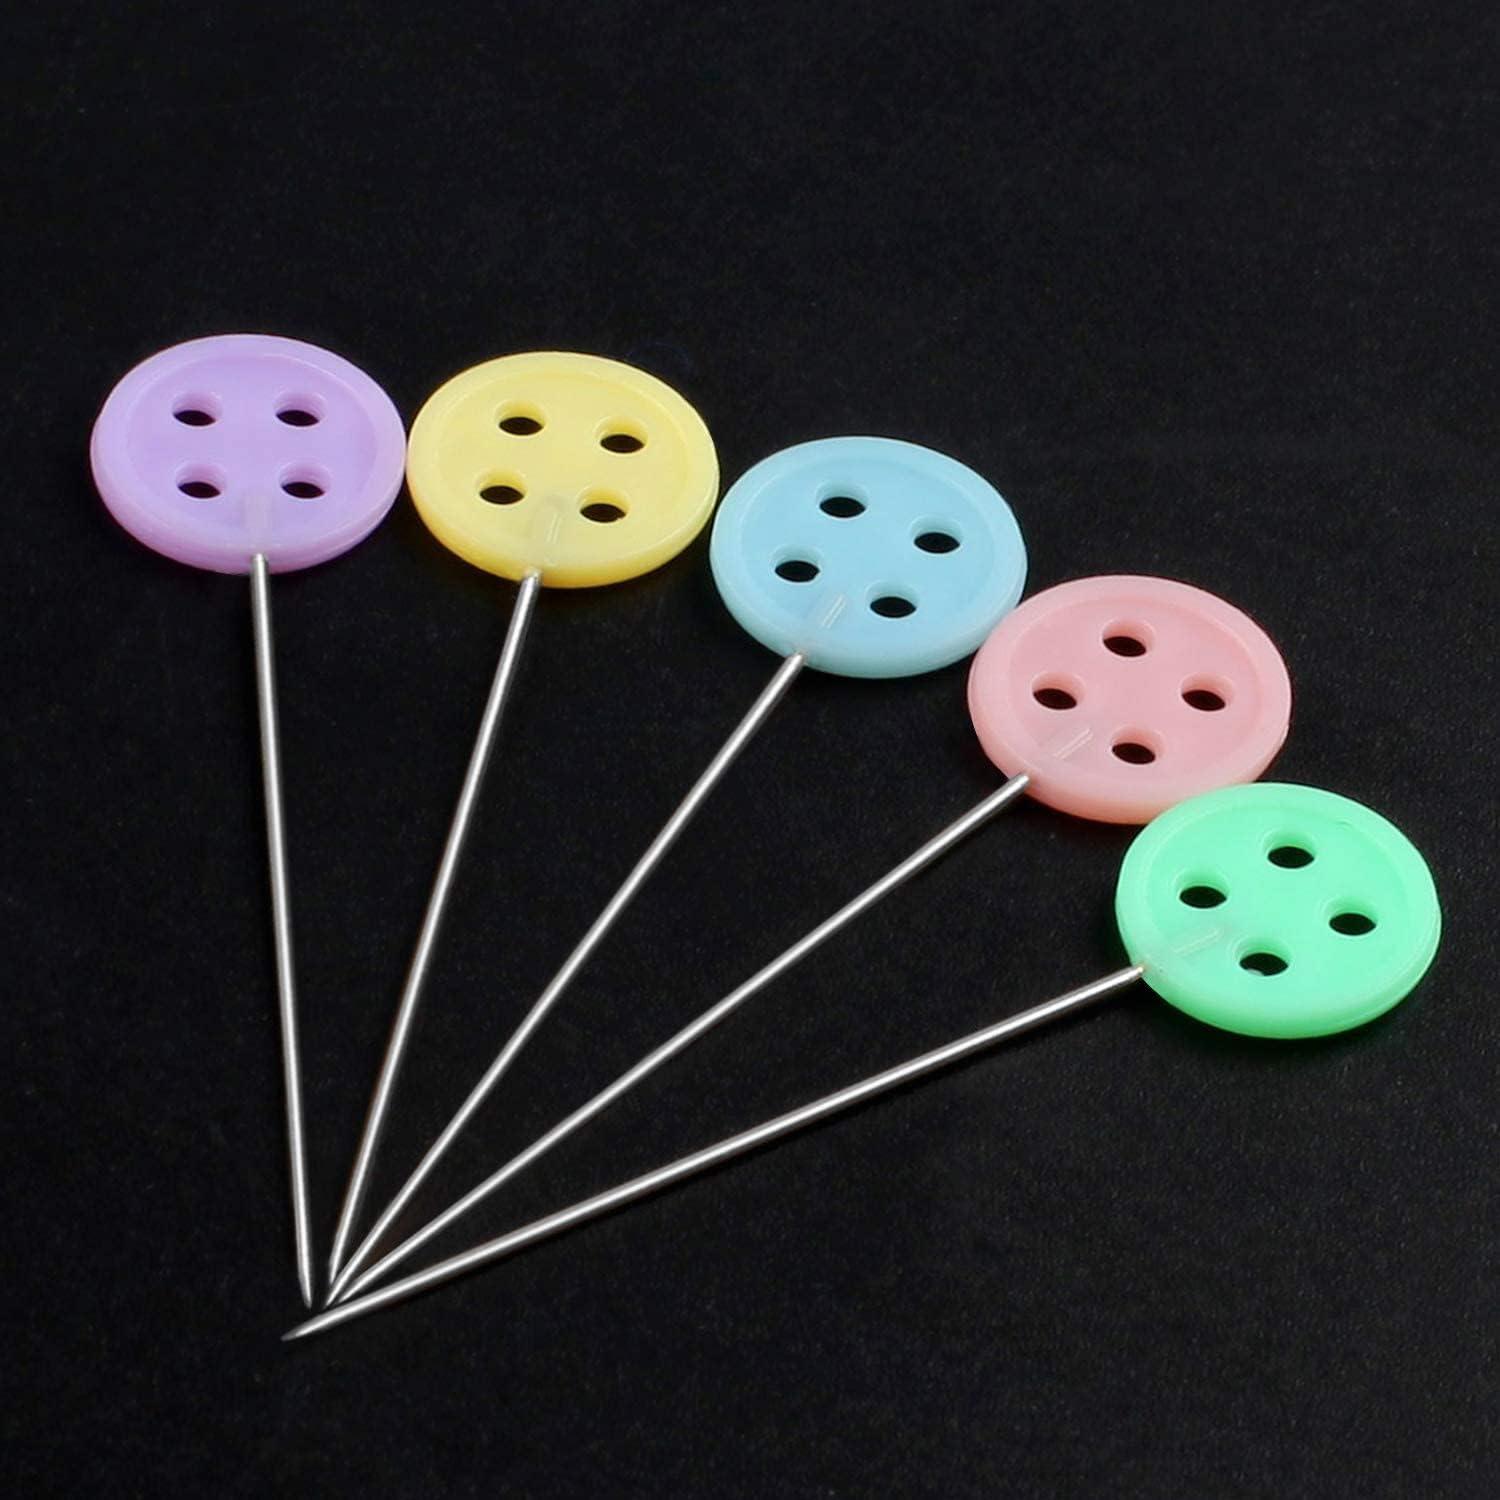 100 Pieces Flat Head Straight Pins Flower Button Head Sewing Pins